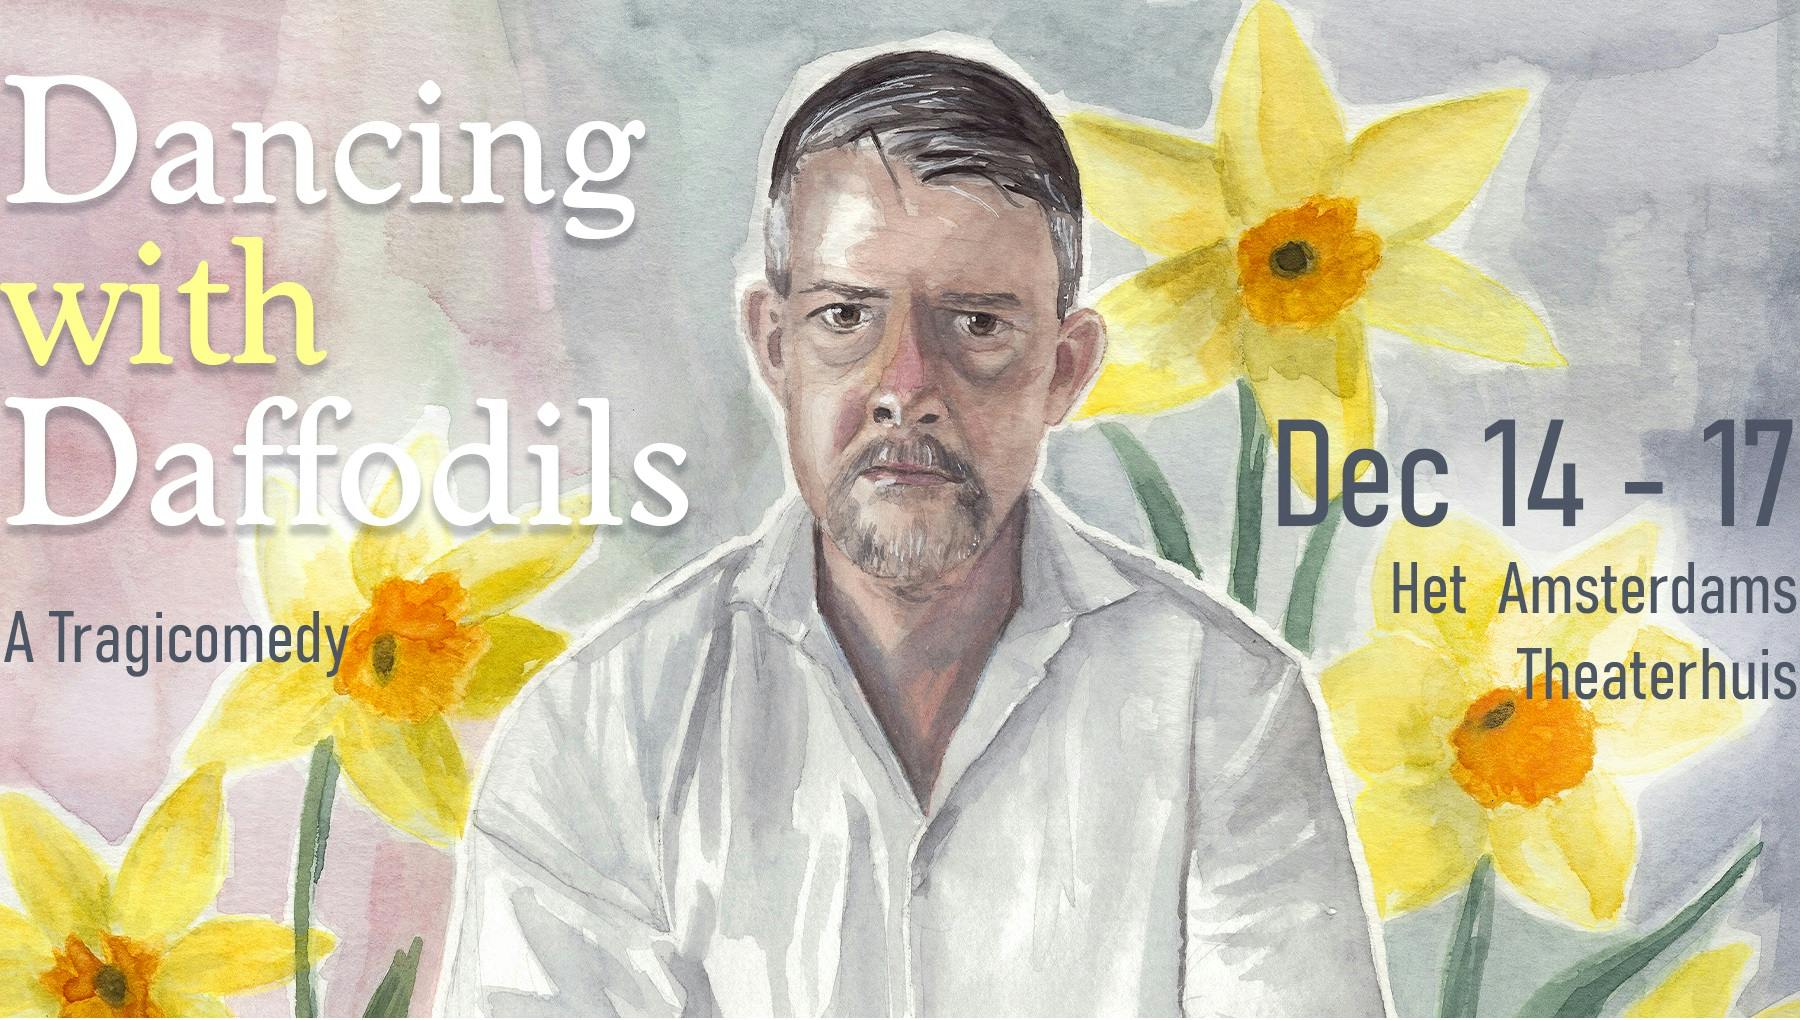 Dancing with Daffodils